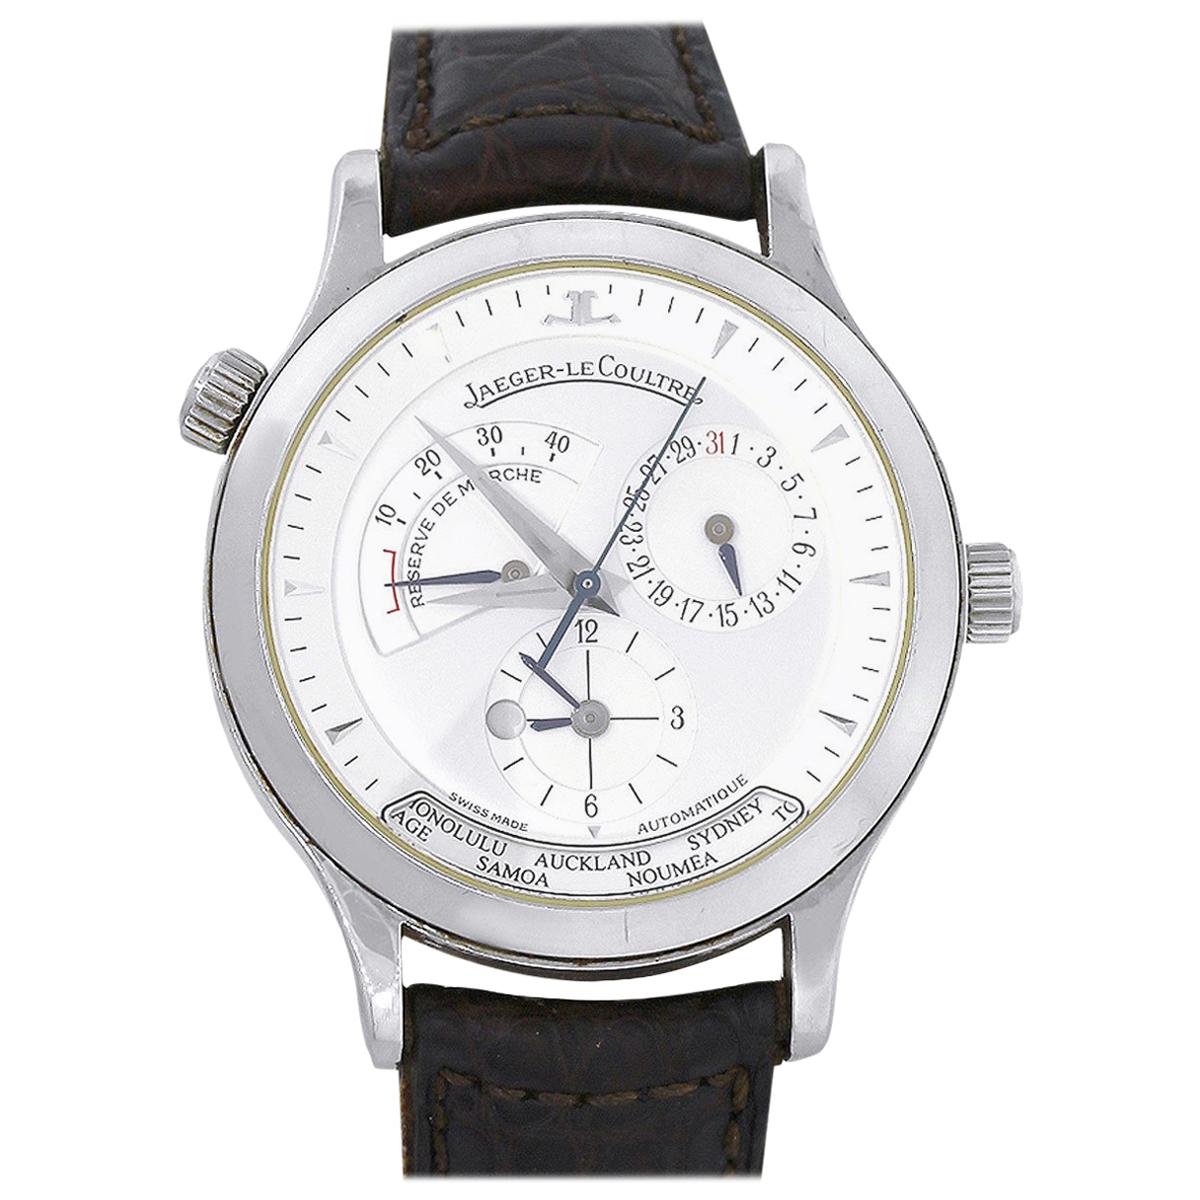 Jaeger-LeCoultre 142.8.92 Master Geographic Stainless Steel Watch